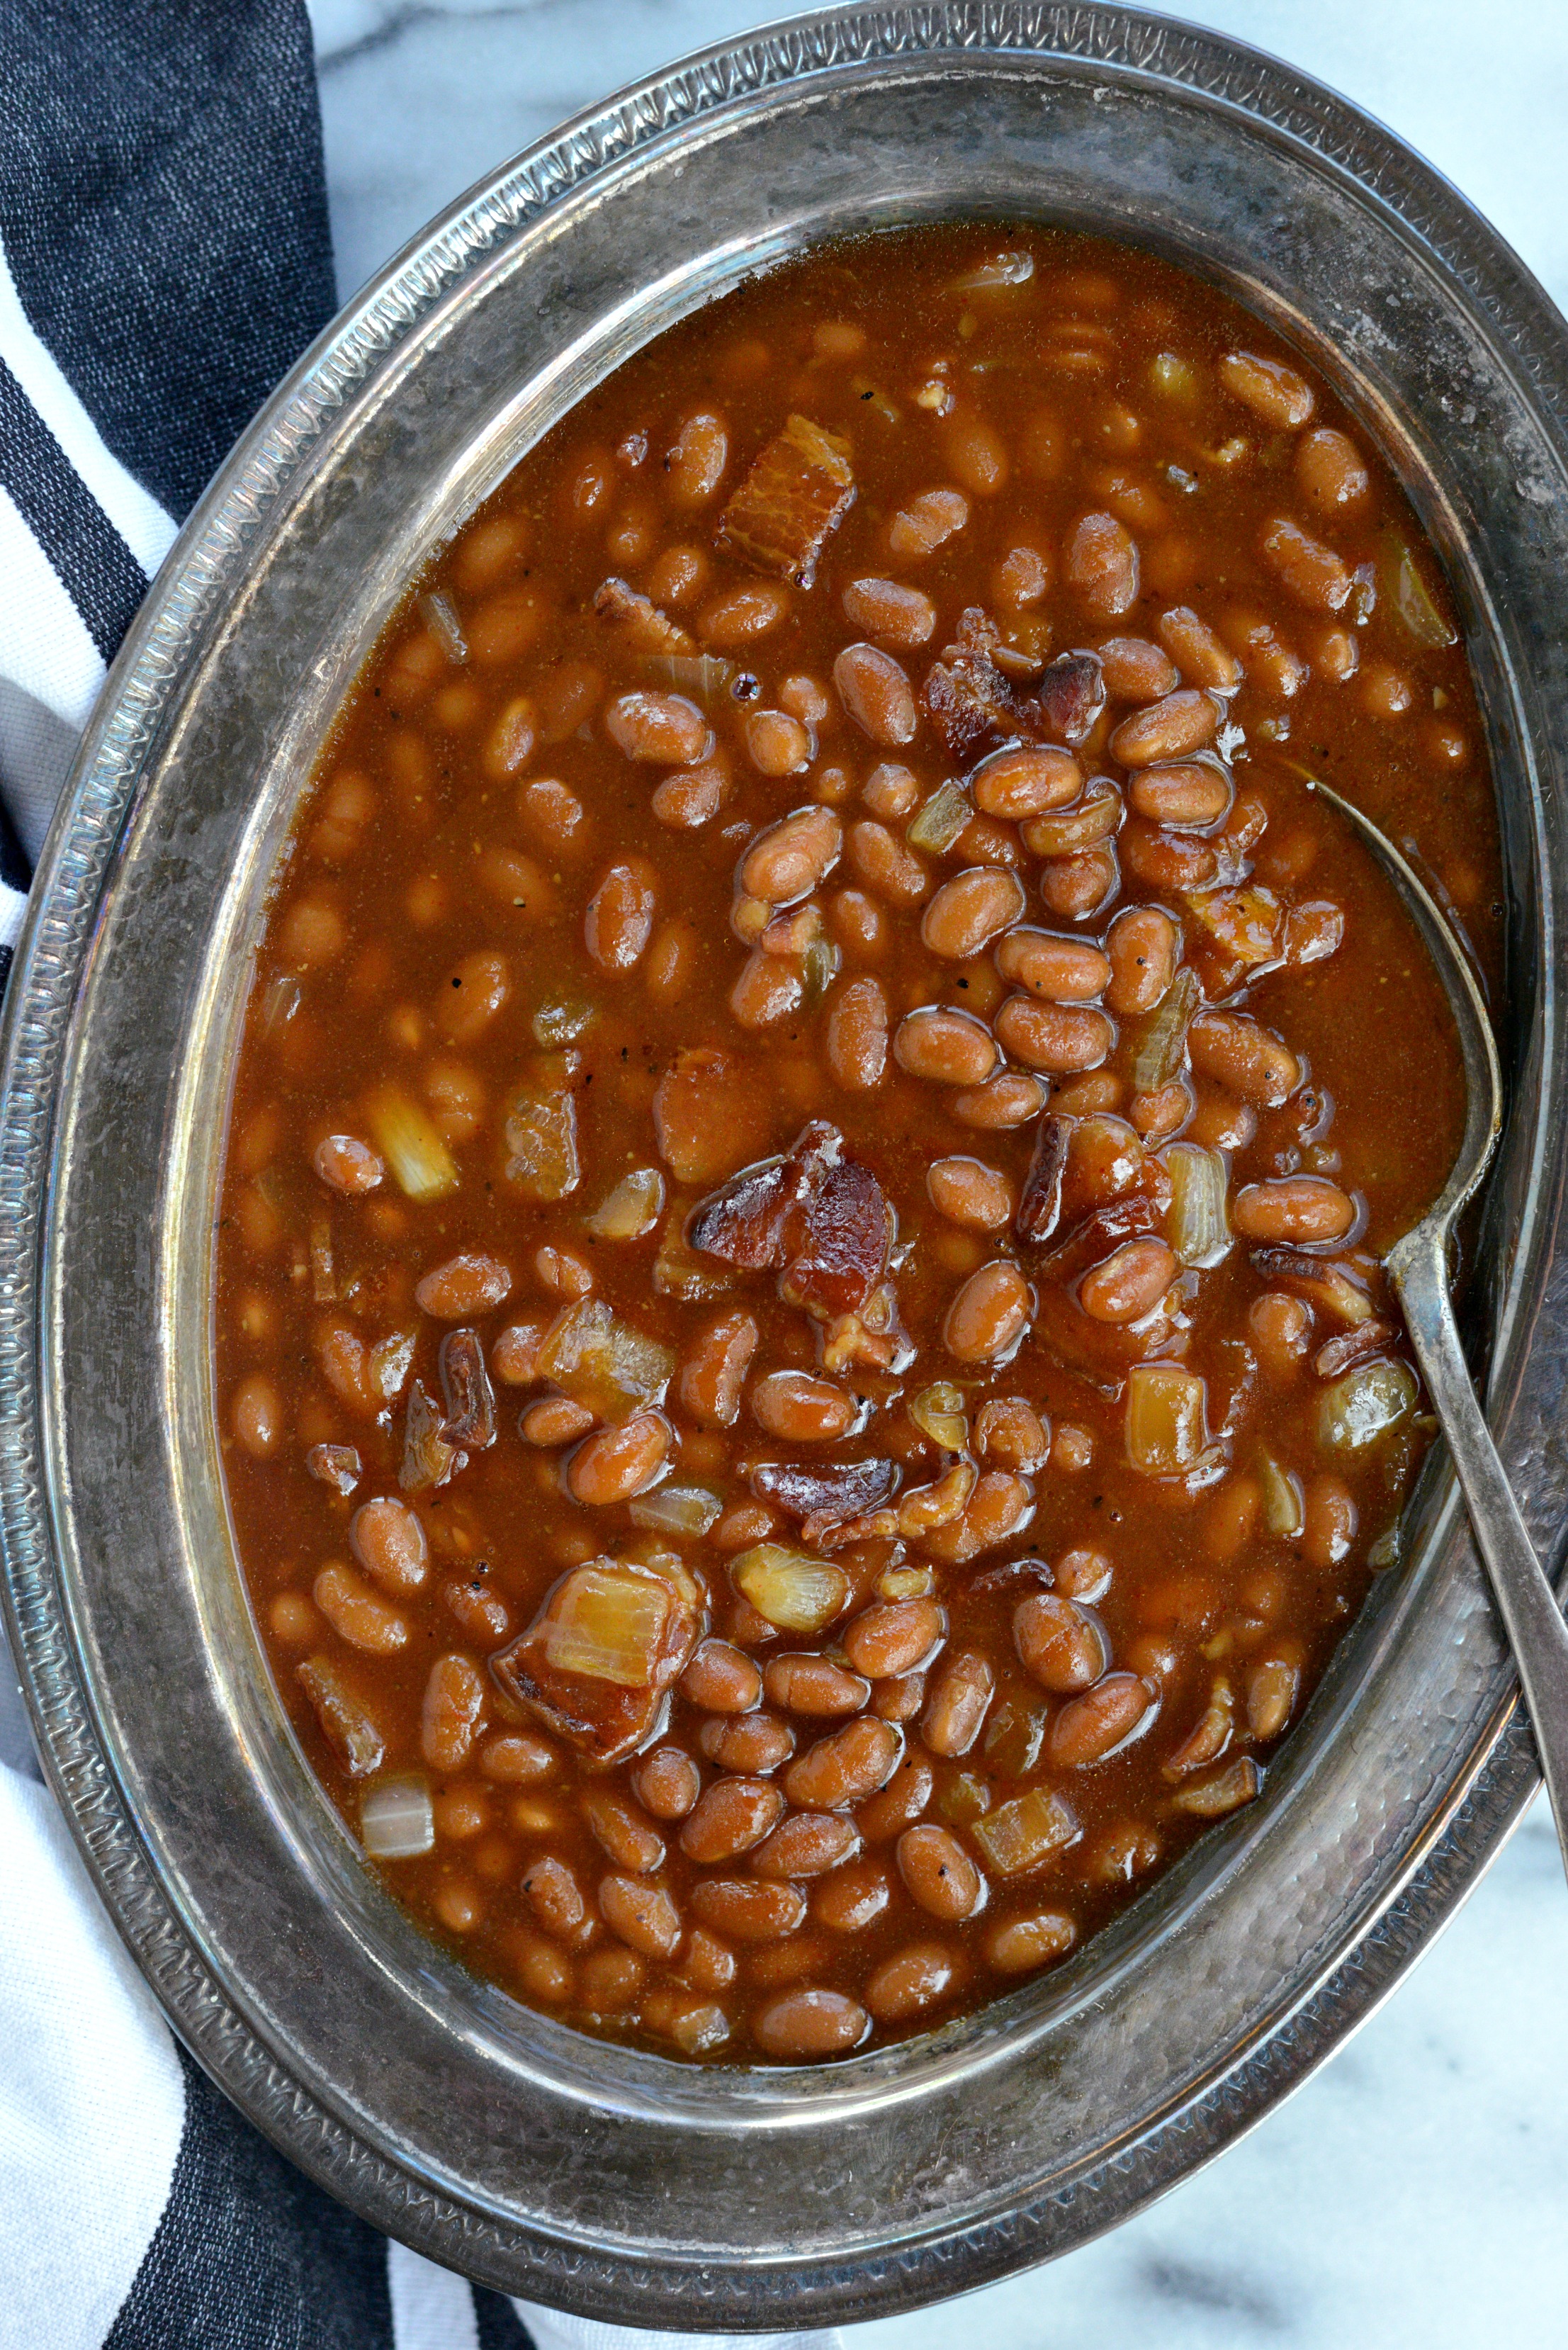 baked beans from scratch